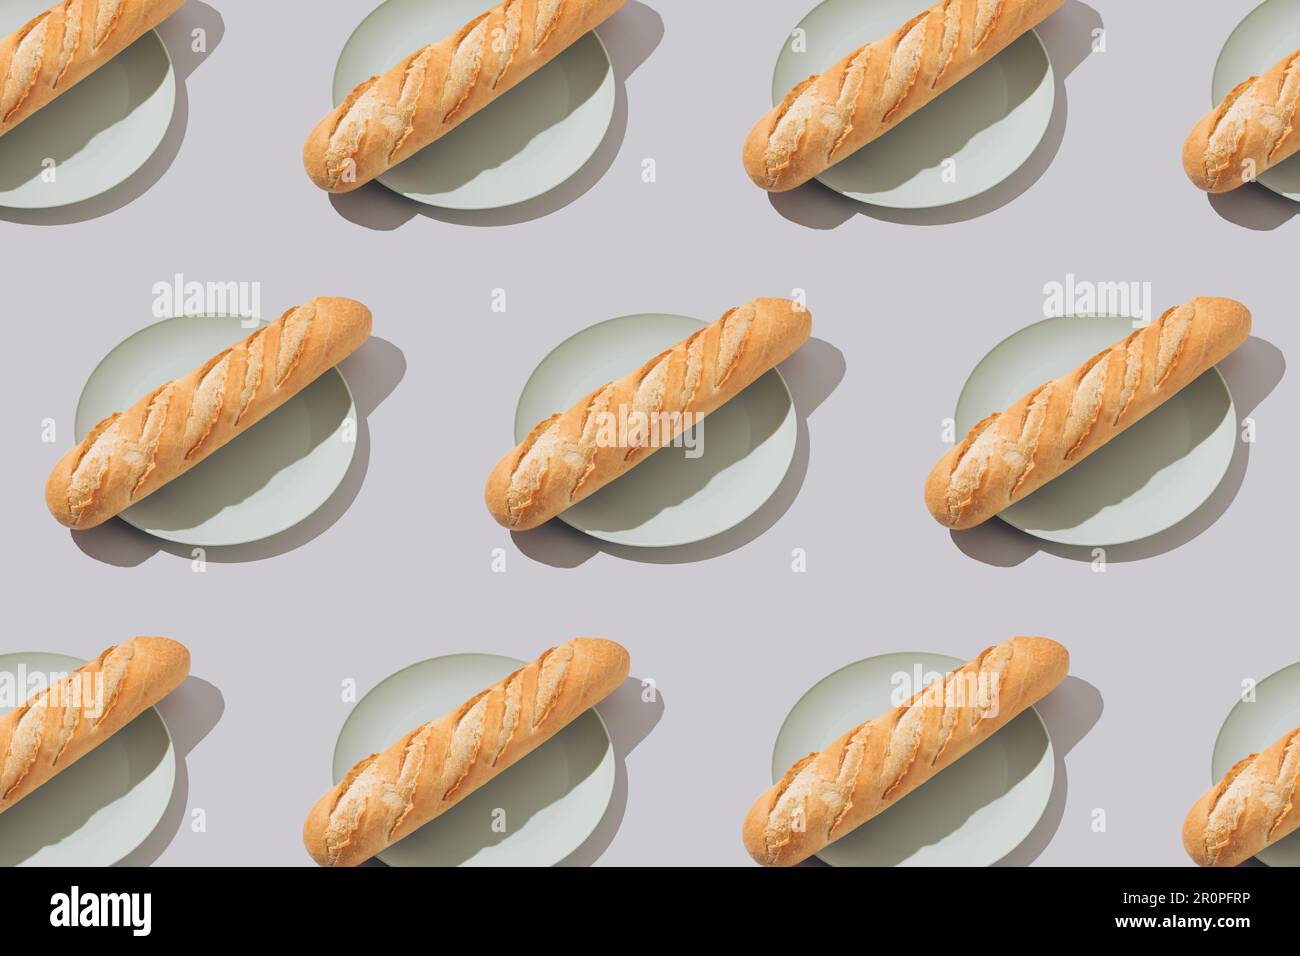 Creative food pattern with fresh french baguettes on plates. Minimal concept. Stock Photo